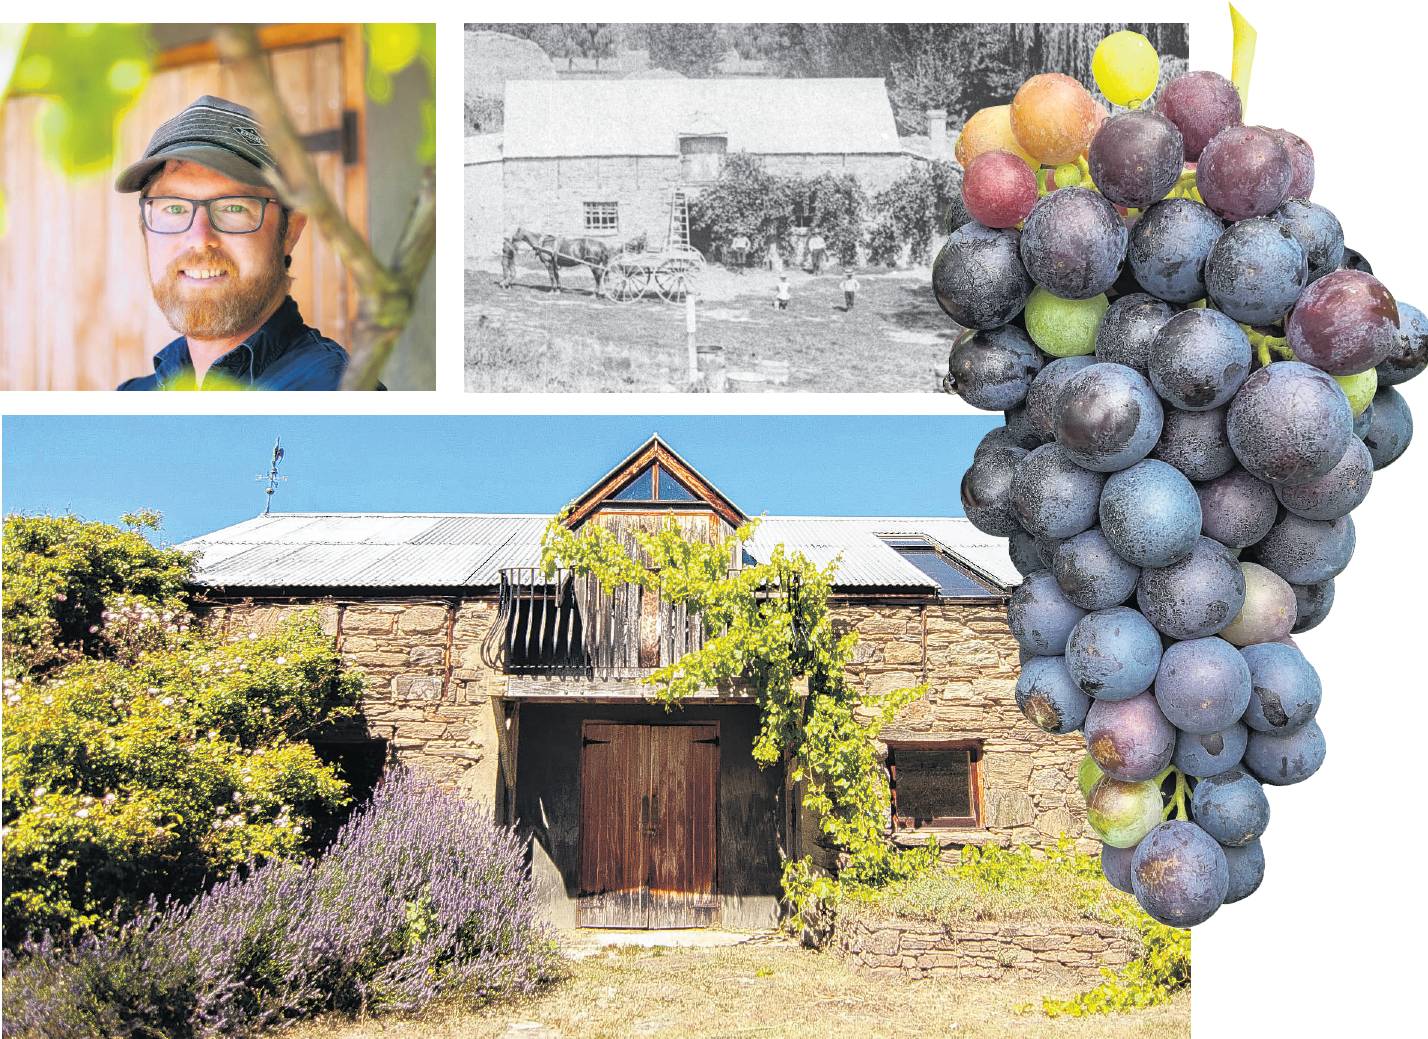 Monte Christo viticulturist Sam Wood (pictured) says Trollinger grapes have been found growing in Monte Christo Winery, in Clyde, over the balcony of the original stone winery. It is not known how long they have been there, but they can also be seen in th